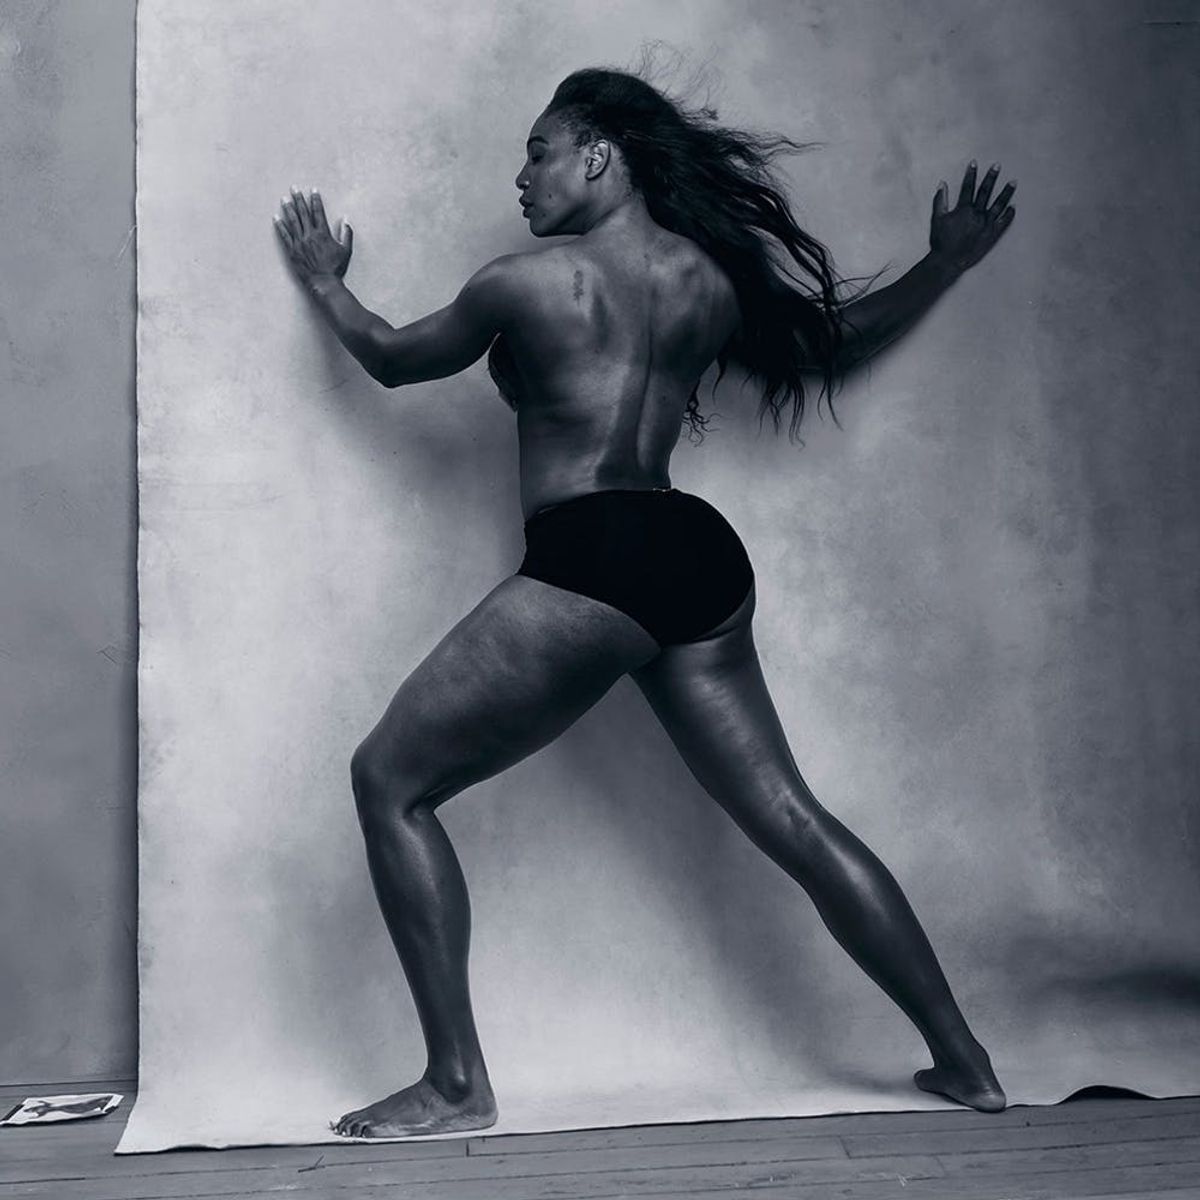 Annie Leibovitz’s New Calendar Features Our Favorite Girl Bosses (With and Without Clothing)